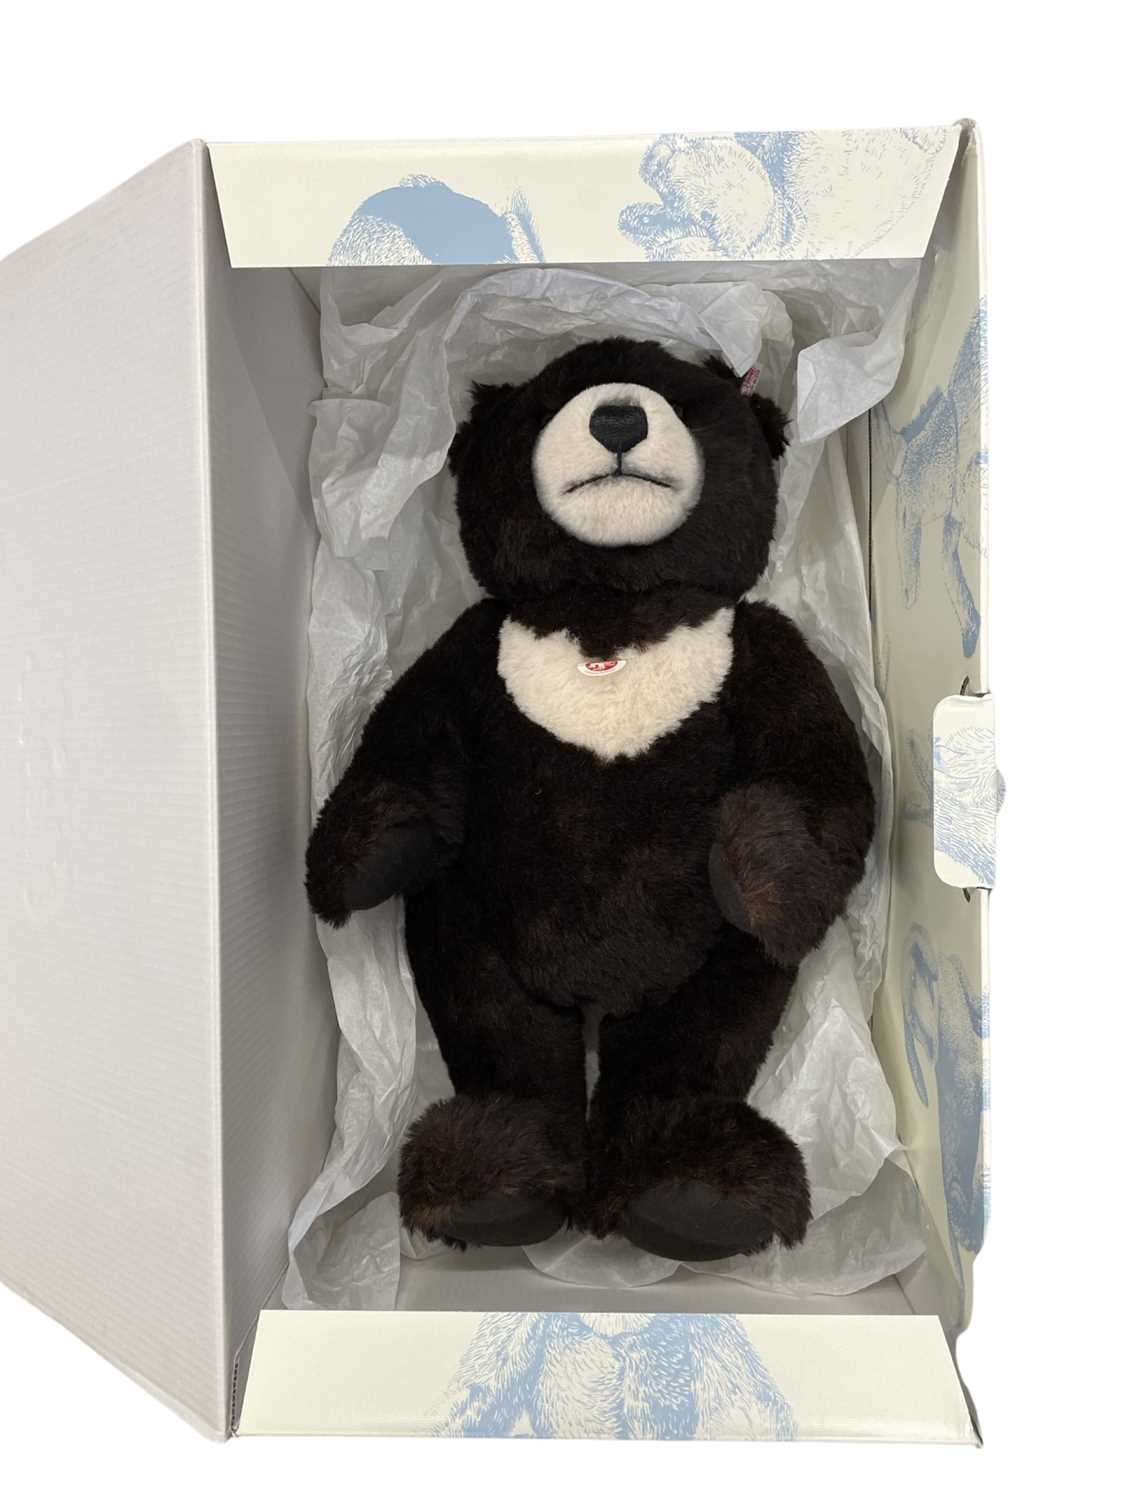 A large boxed limited edition Steiff teddy bear, Moon Ted, 036491. Only 1500 pieces made, soft